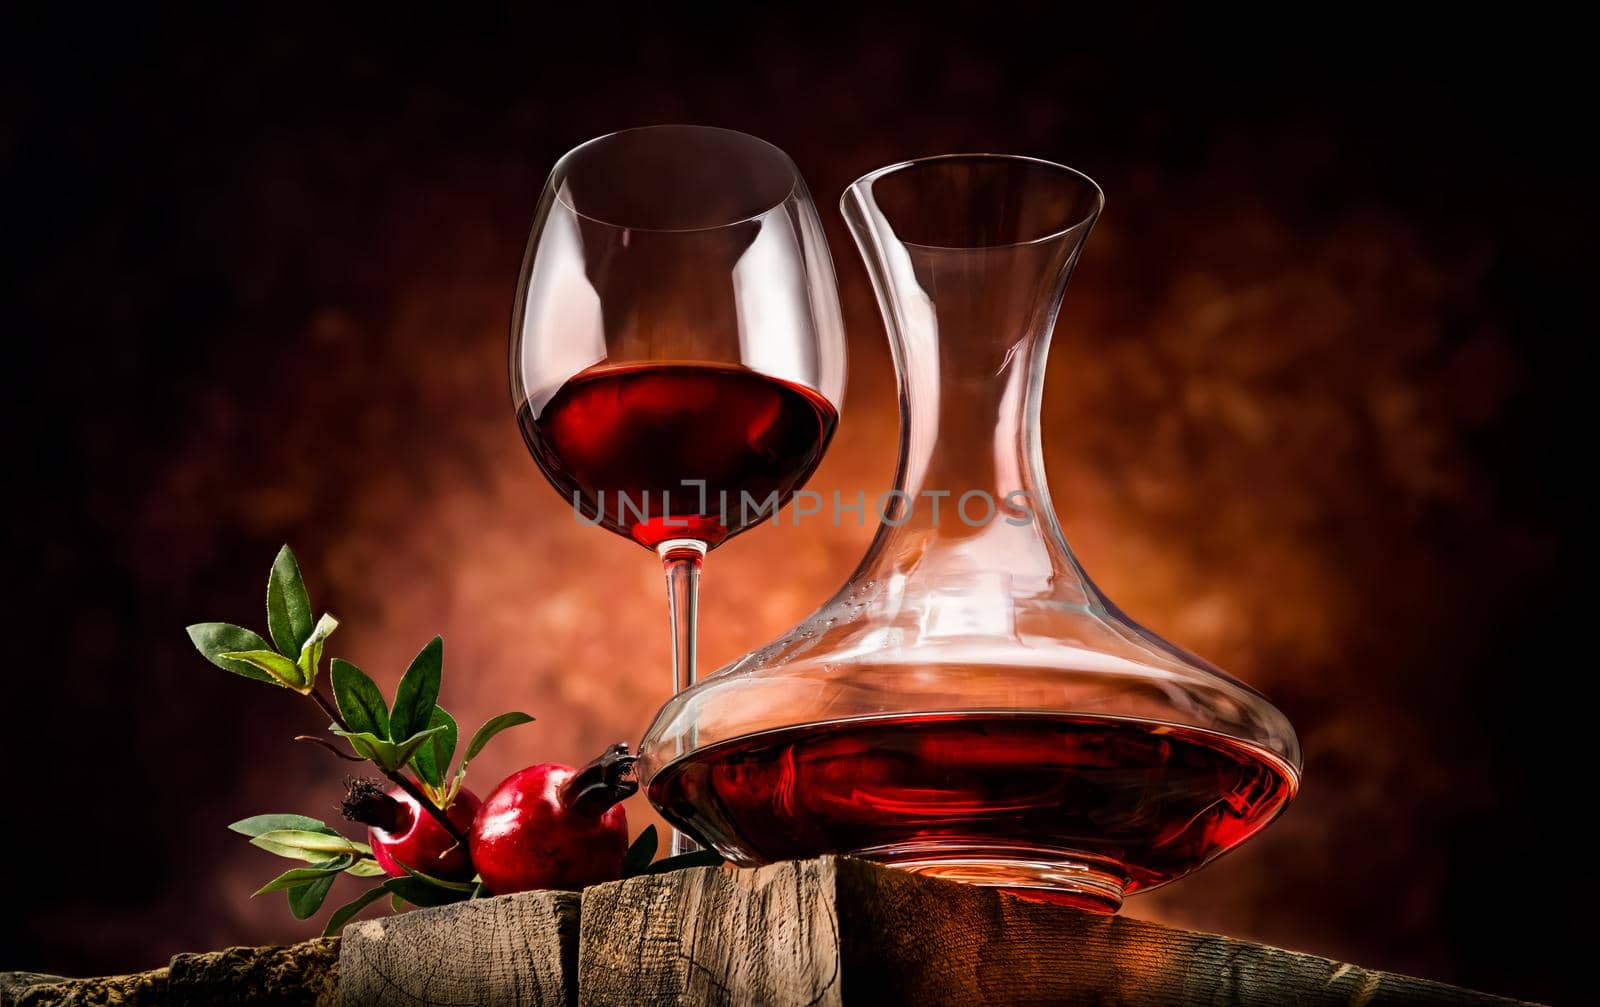 Pomegranate wine on a wooden table in a glass bowl